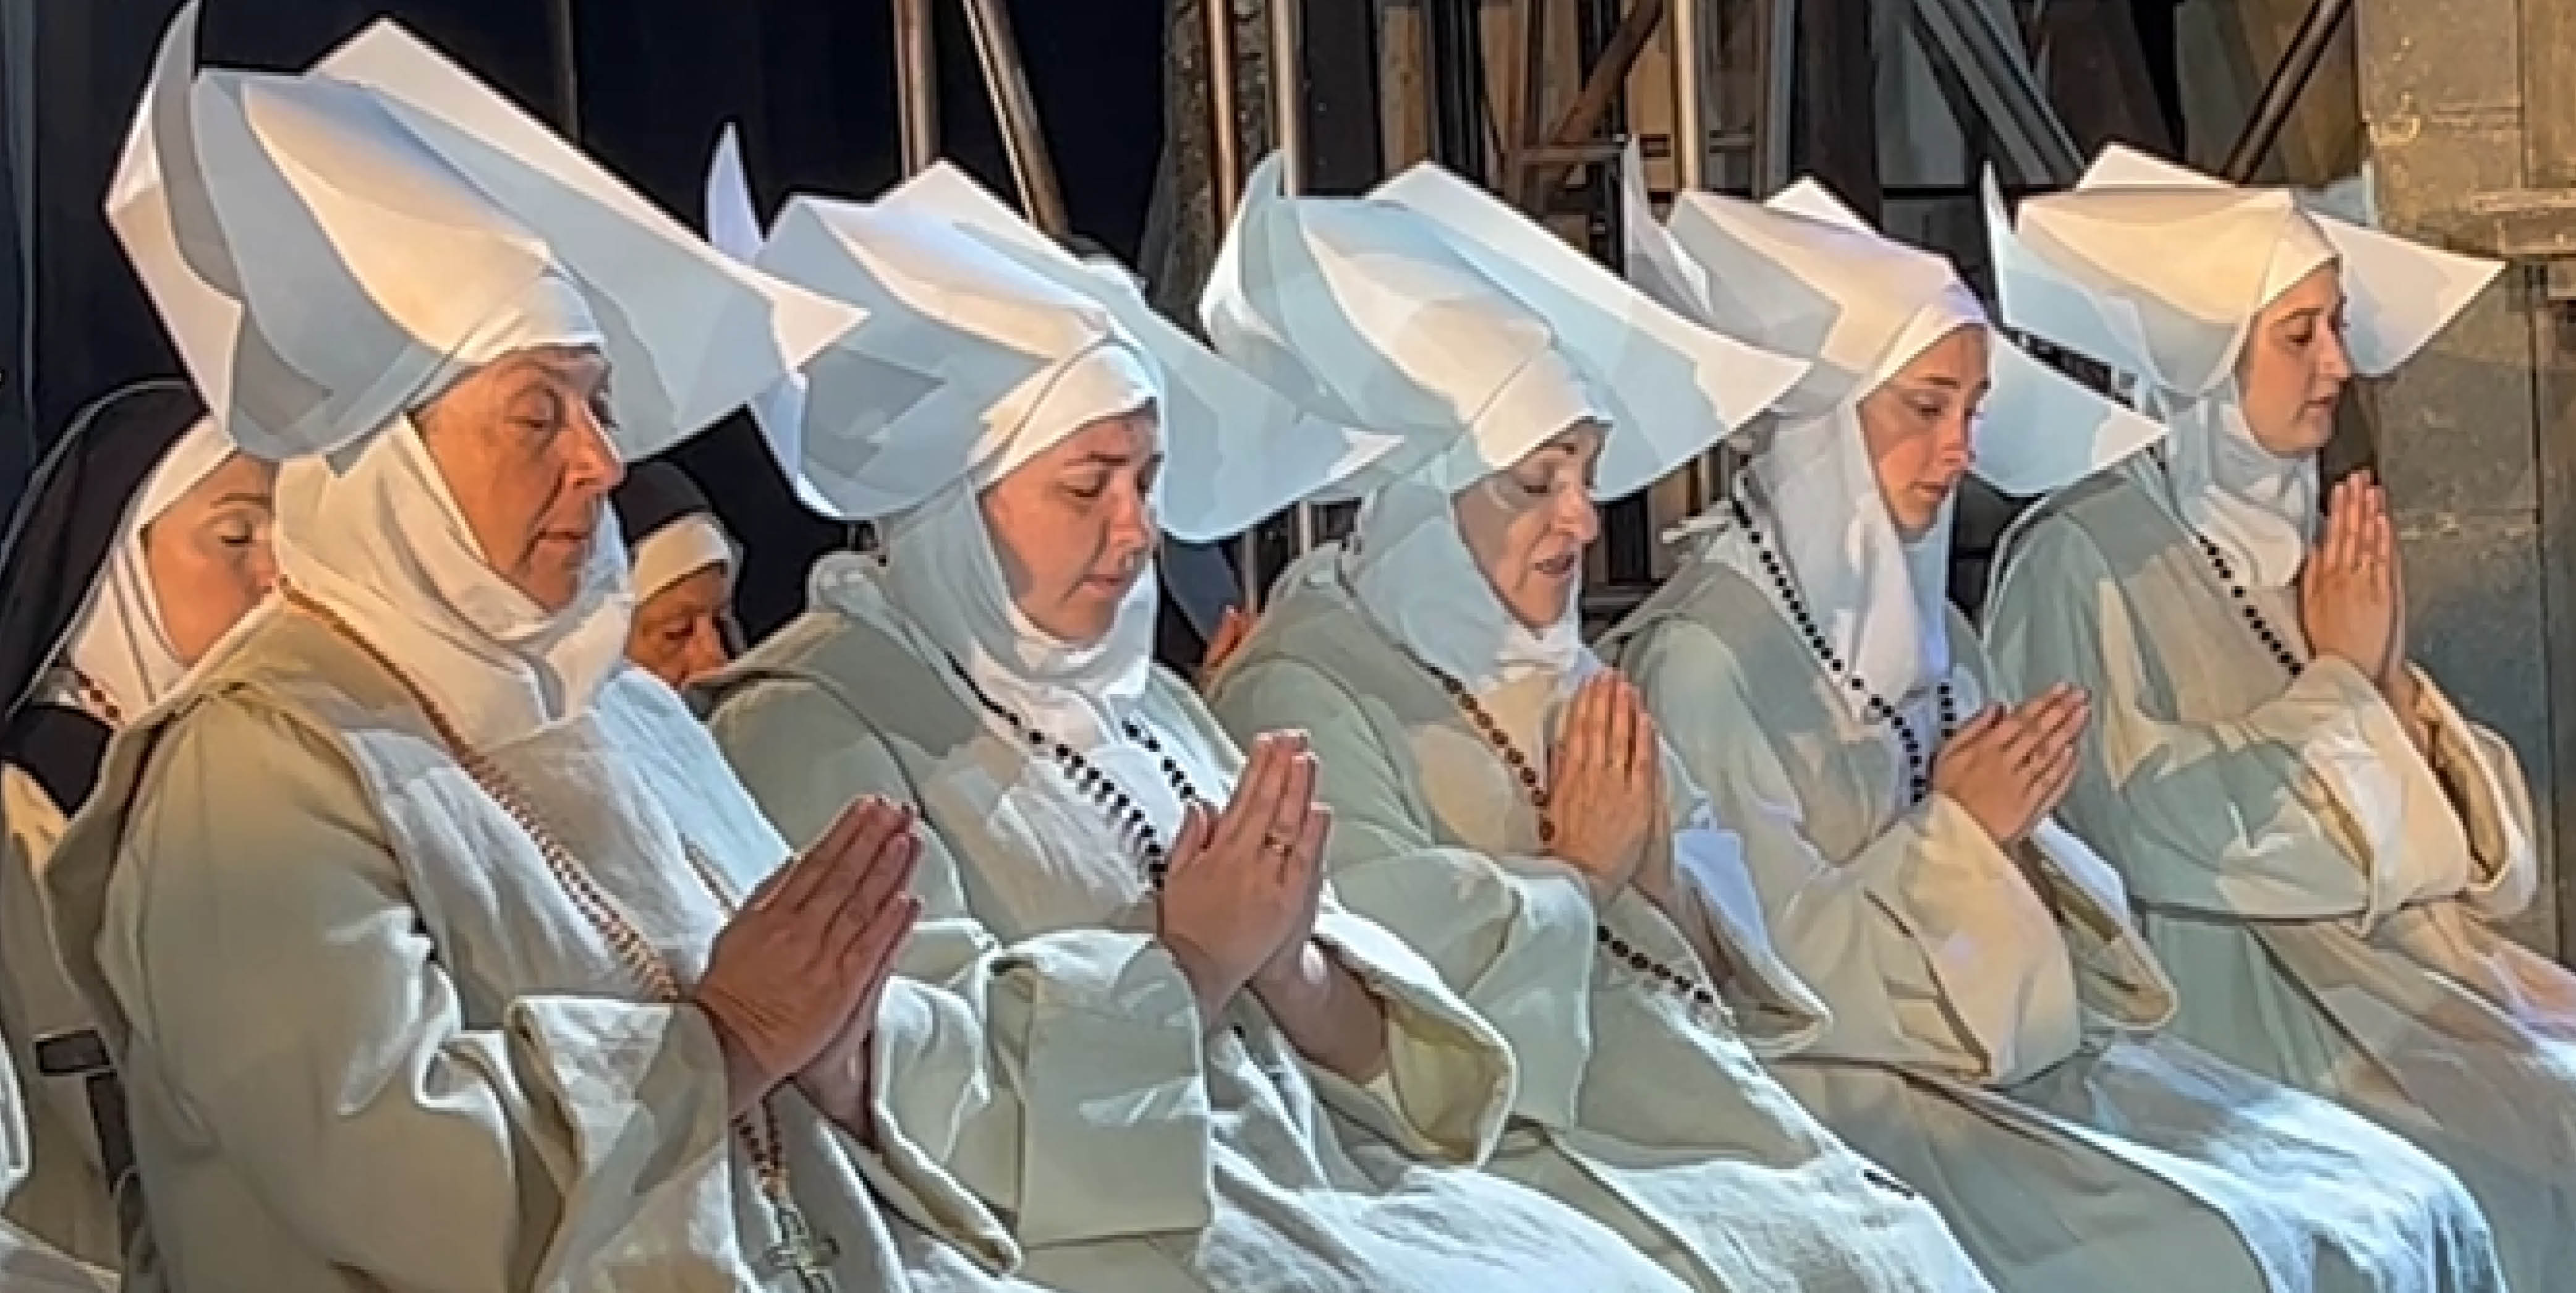 The nuns in chapel